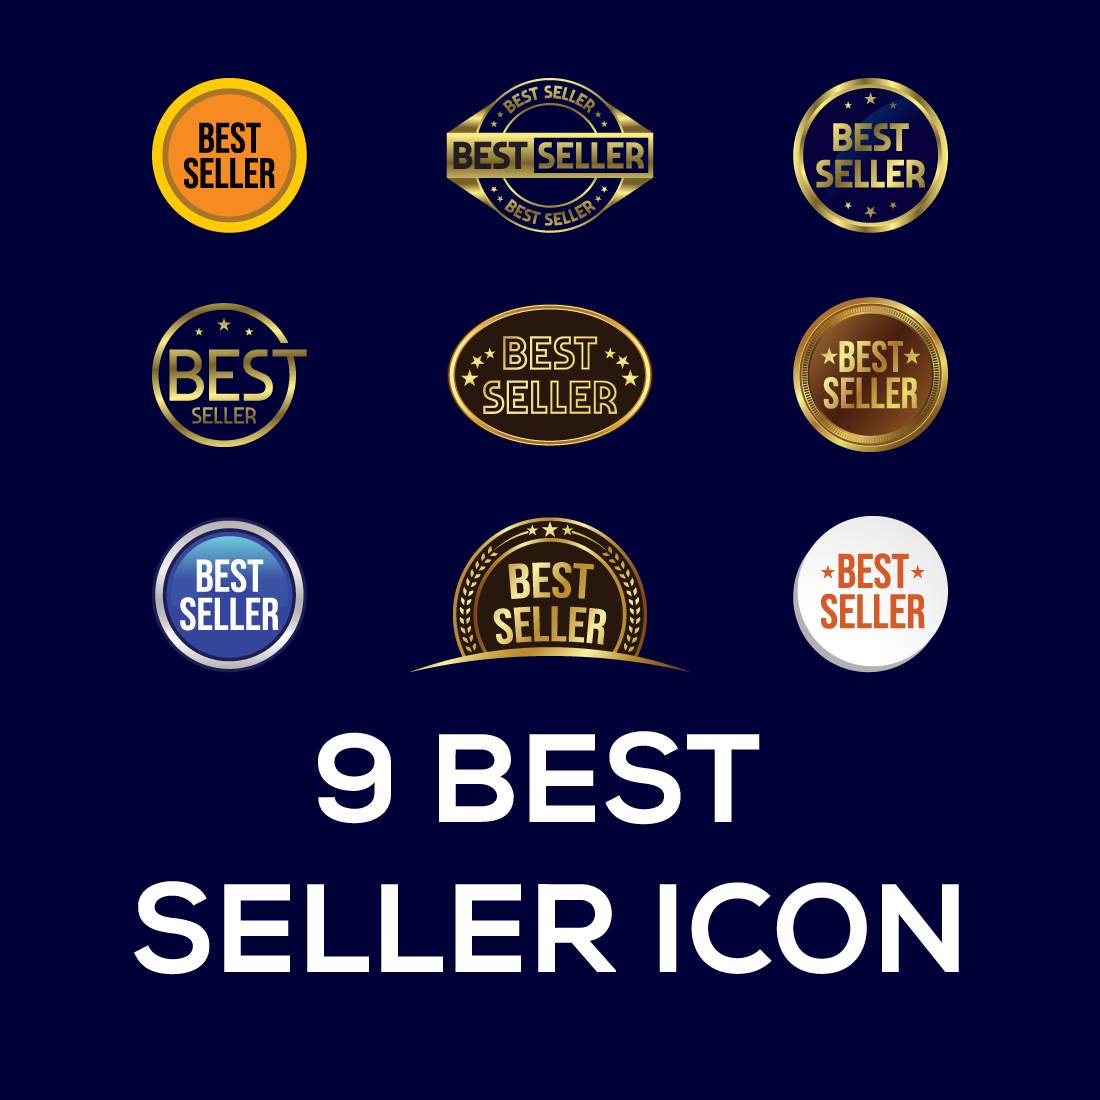 Bestseller Icon Graphics Template Vector Illustration cover image.